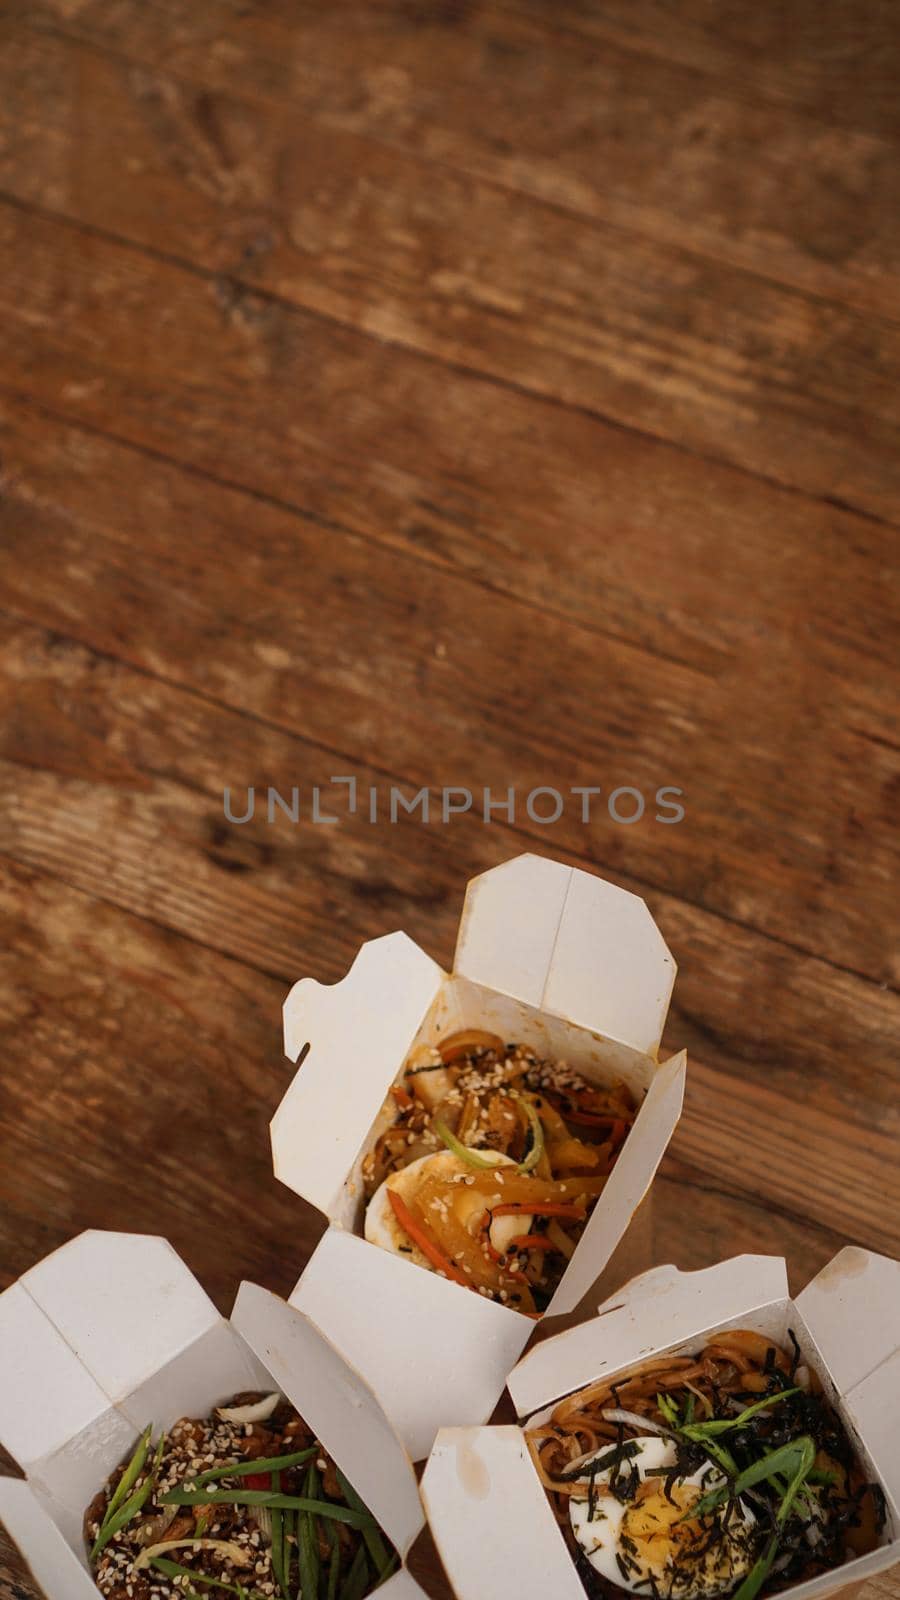 Noodles with pork and vegetables in take-out box on wooden table. Asian food delivery. Food in paper containers on wooden background. Vertical photo